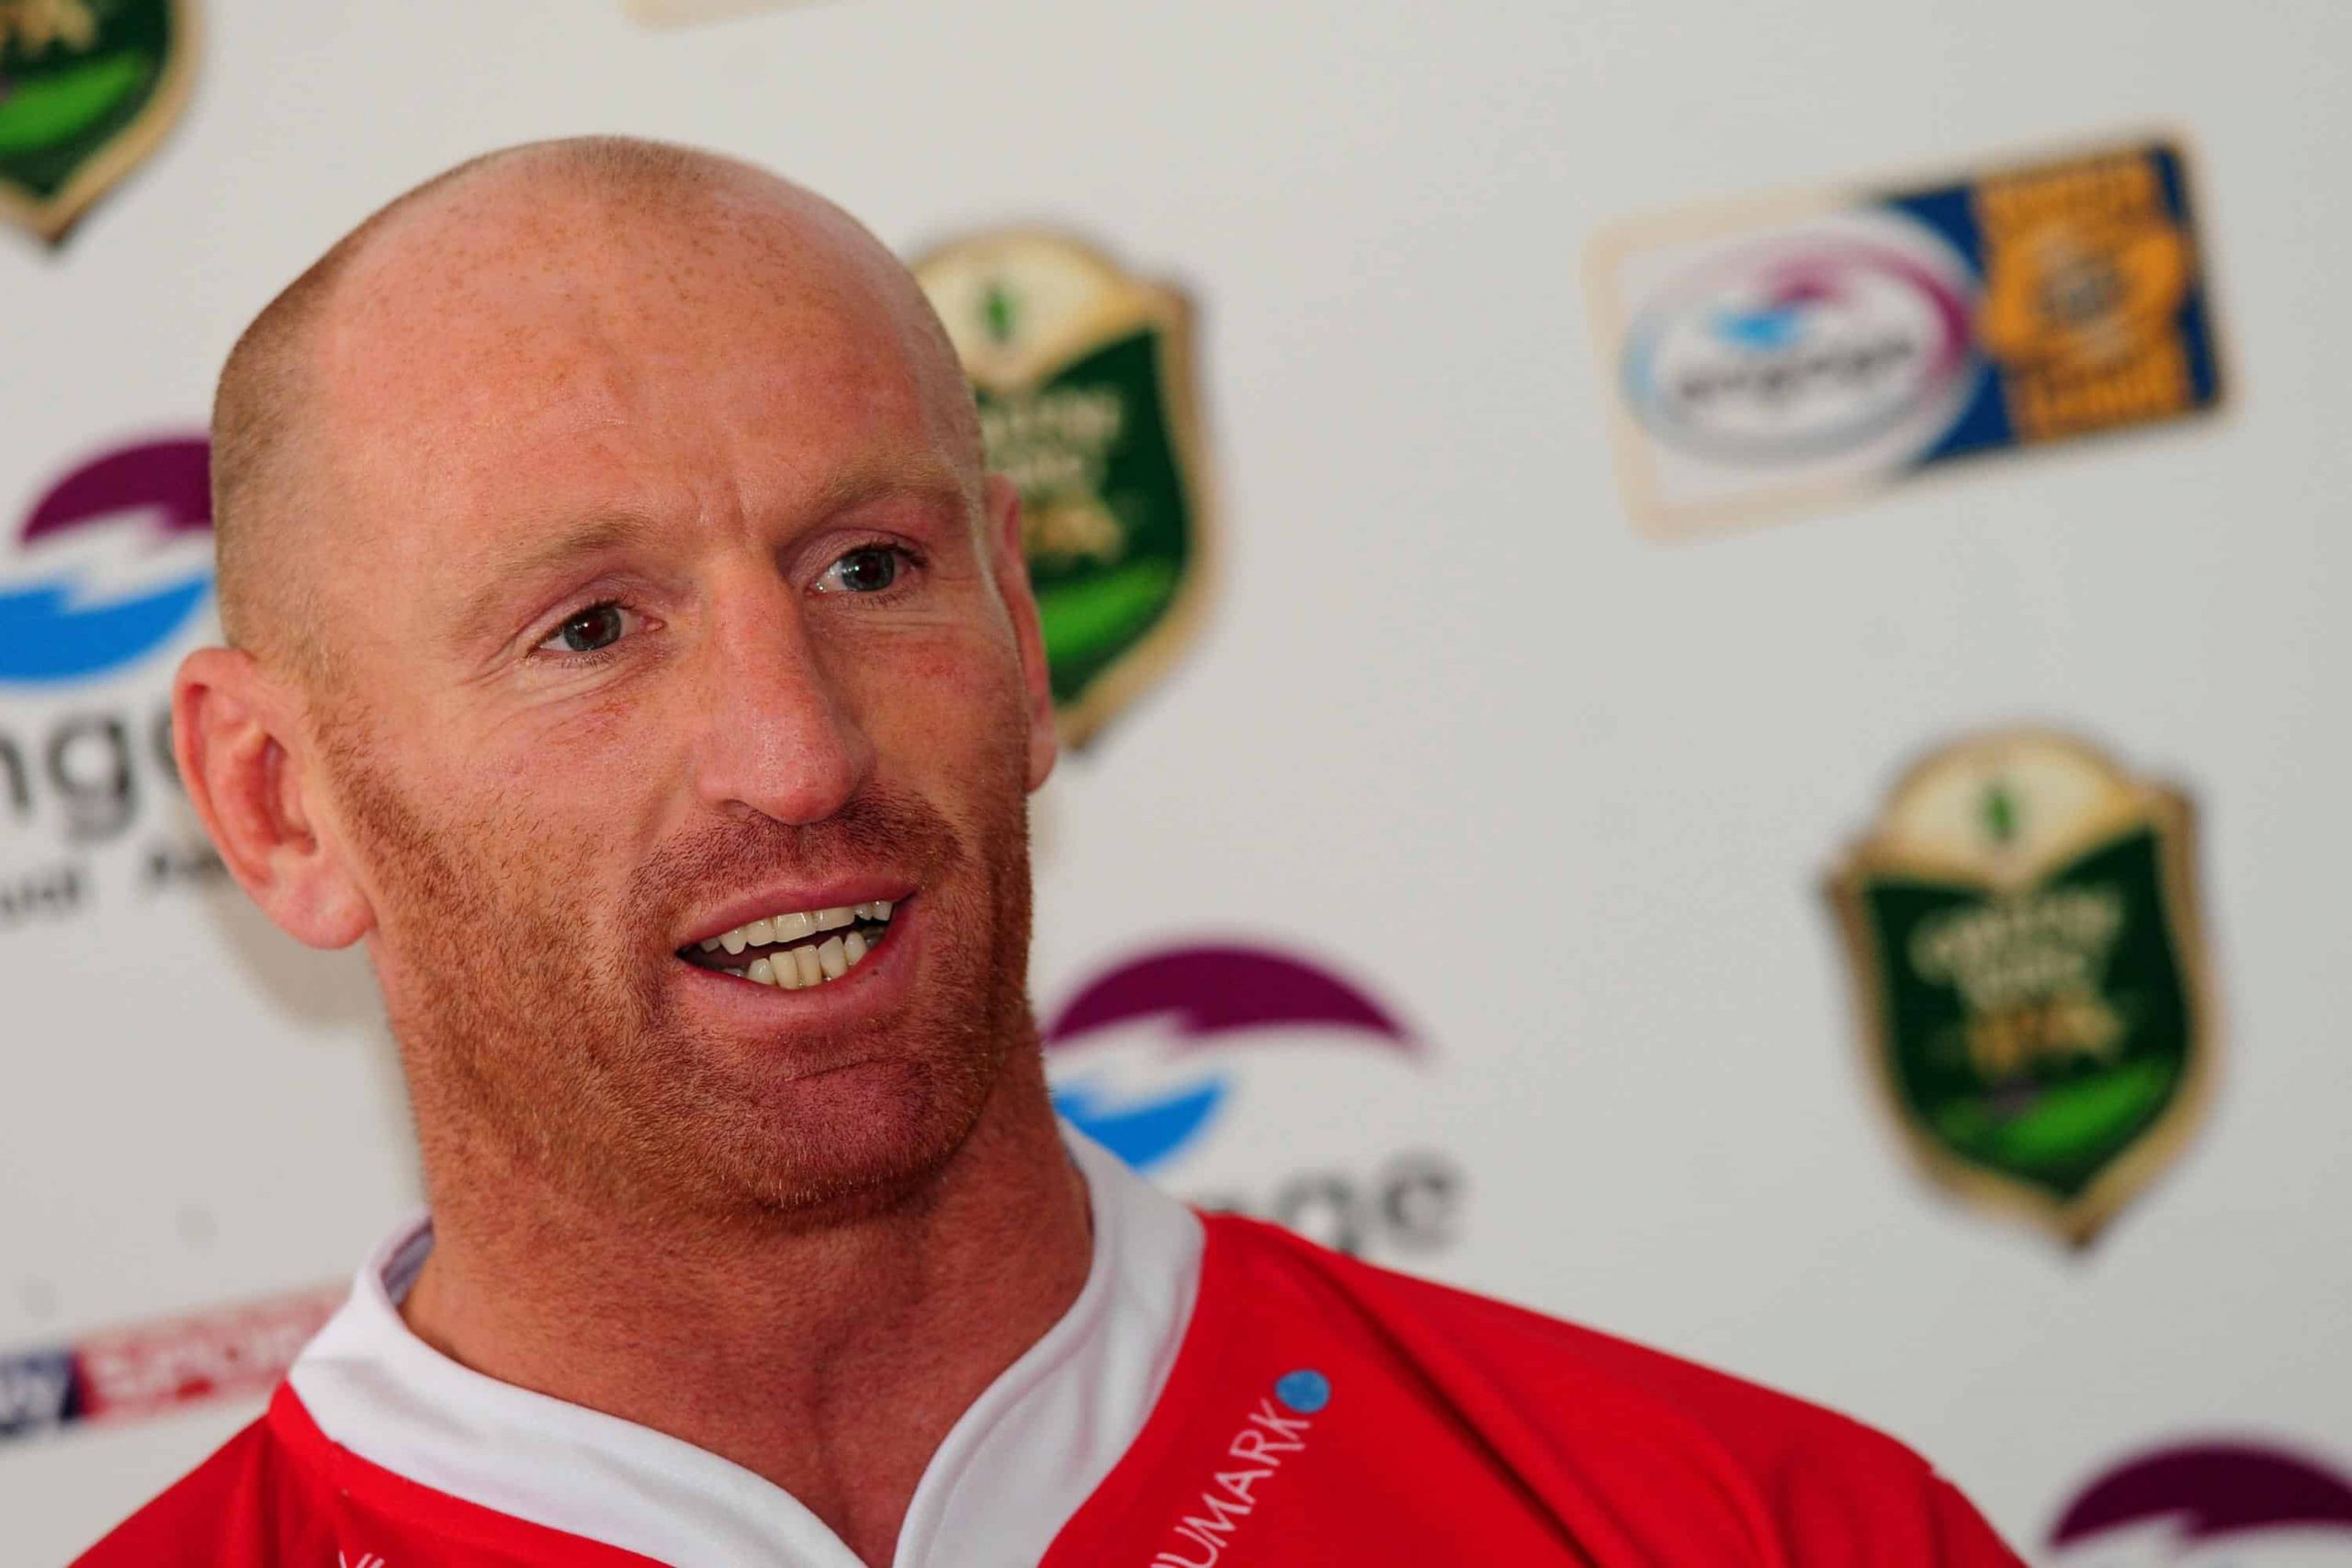 Gareth Thomas ‘would not have revealed HIV diagnosis without press intrusion’